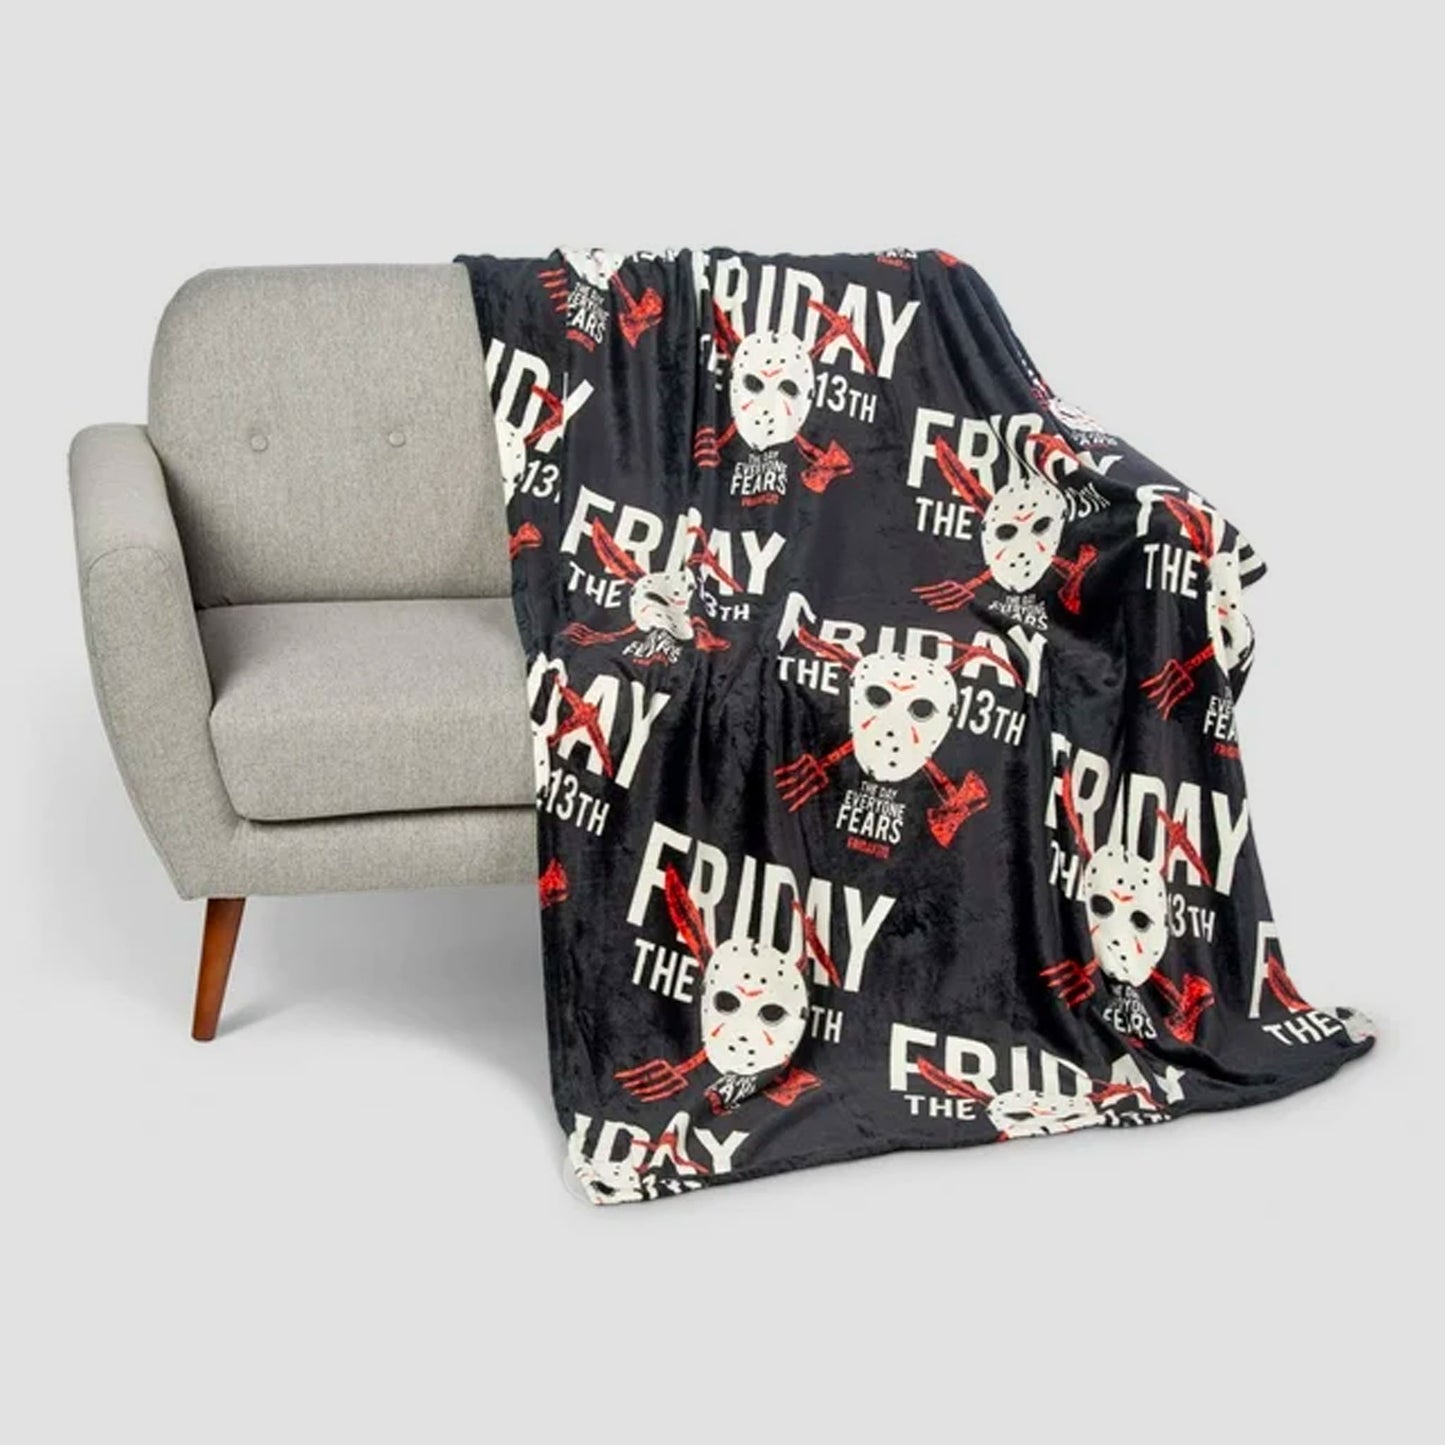 Friday the 13th "Friday Fears" Silk Touch Throw Blanket